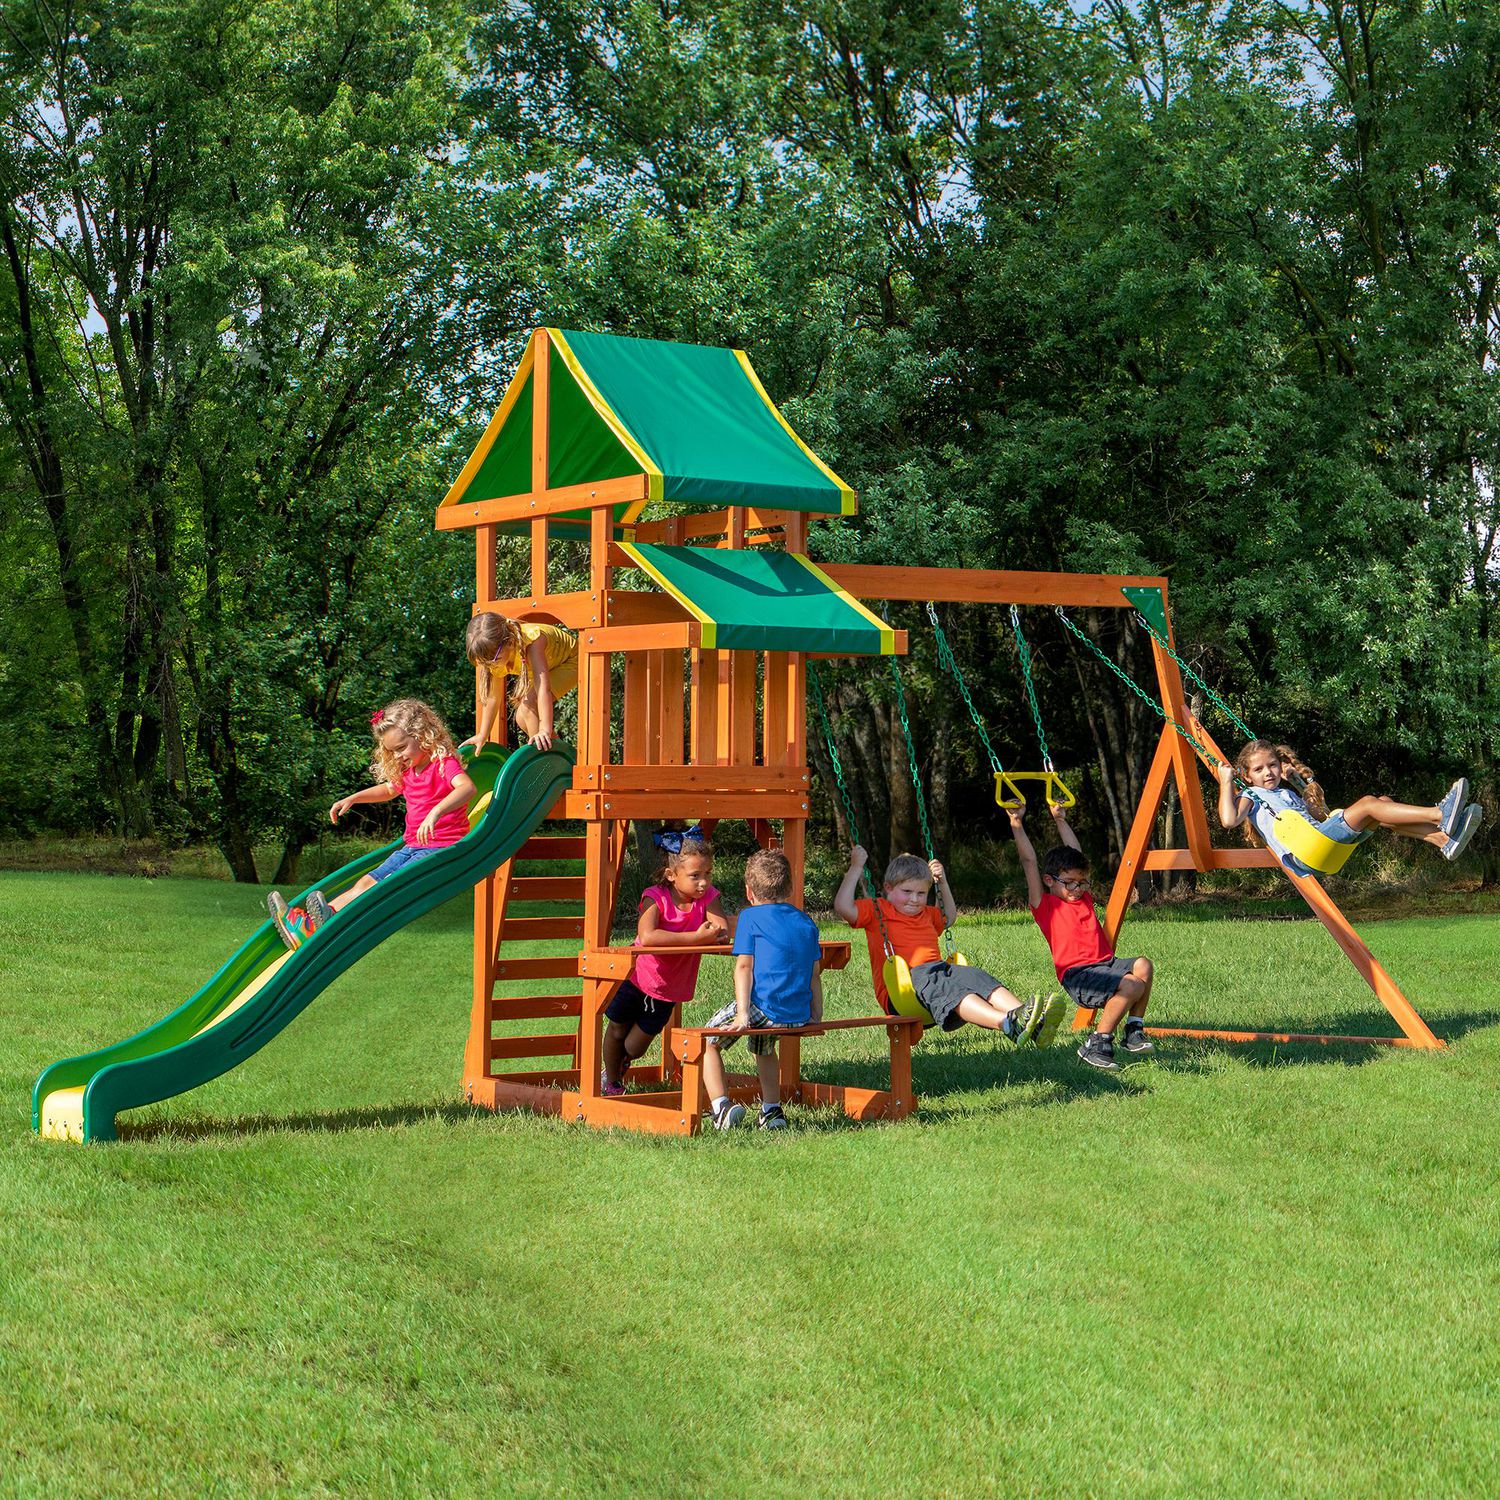 Swing Sets On Sale At Walmart Shop Clothing Shoes Online